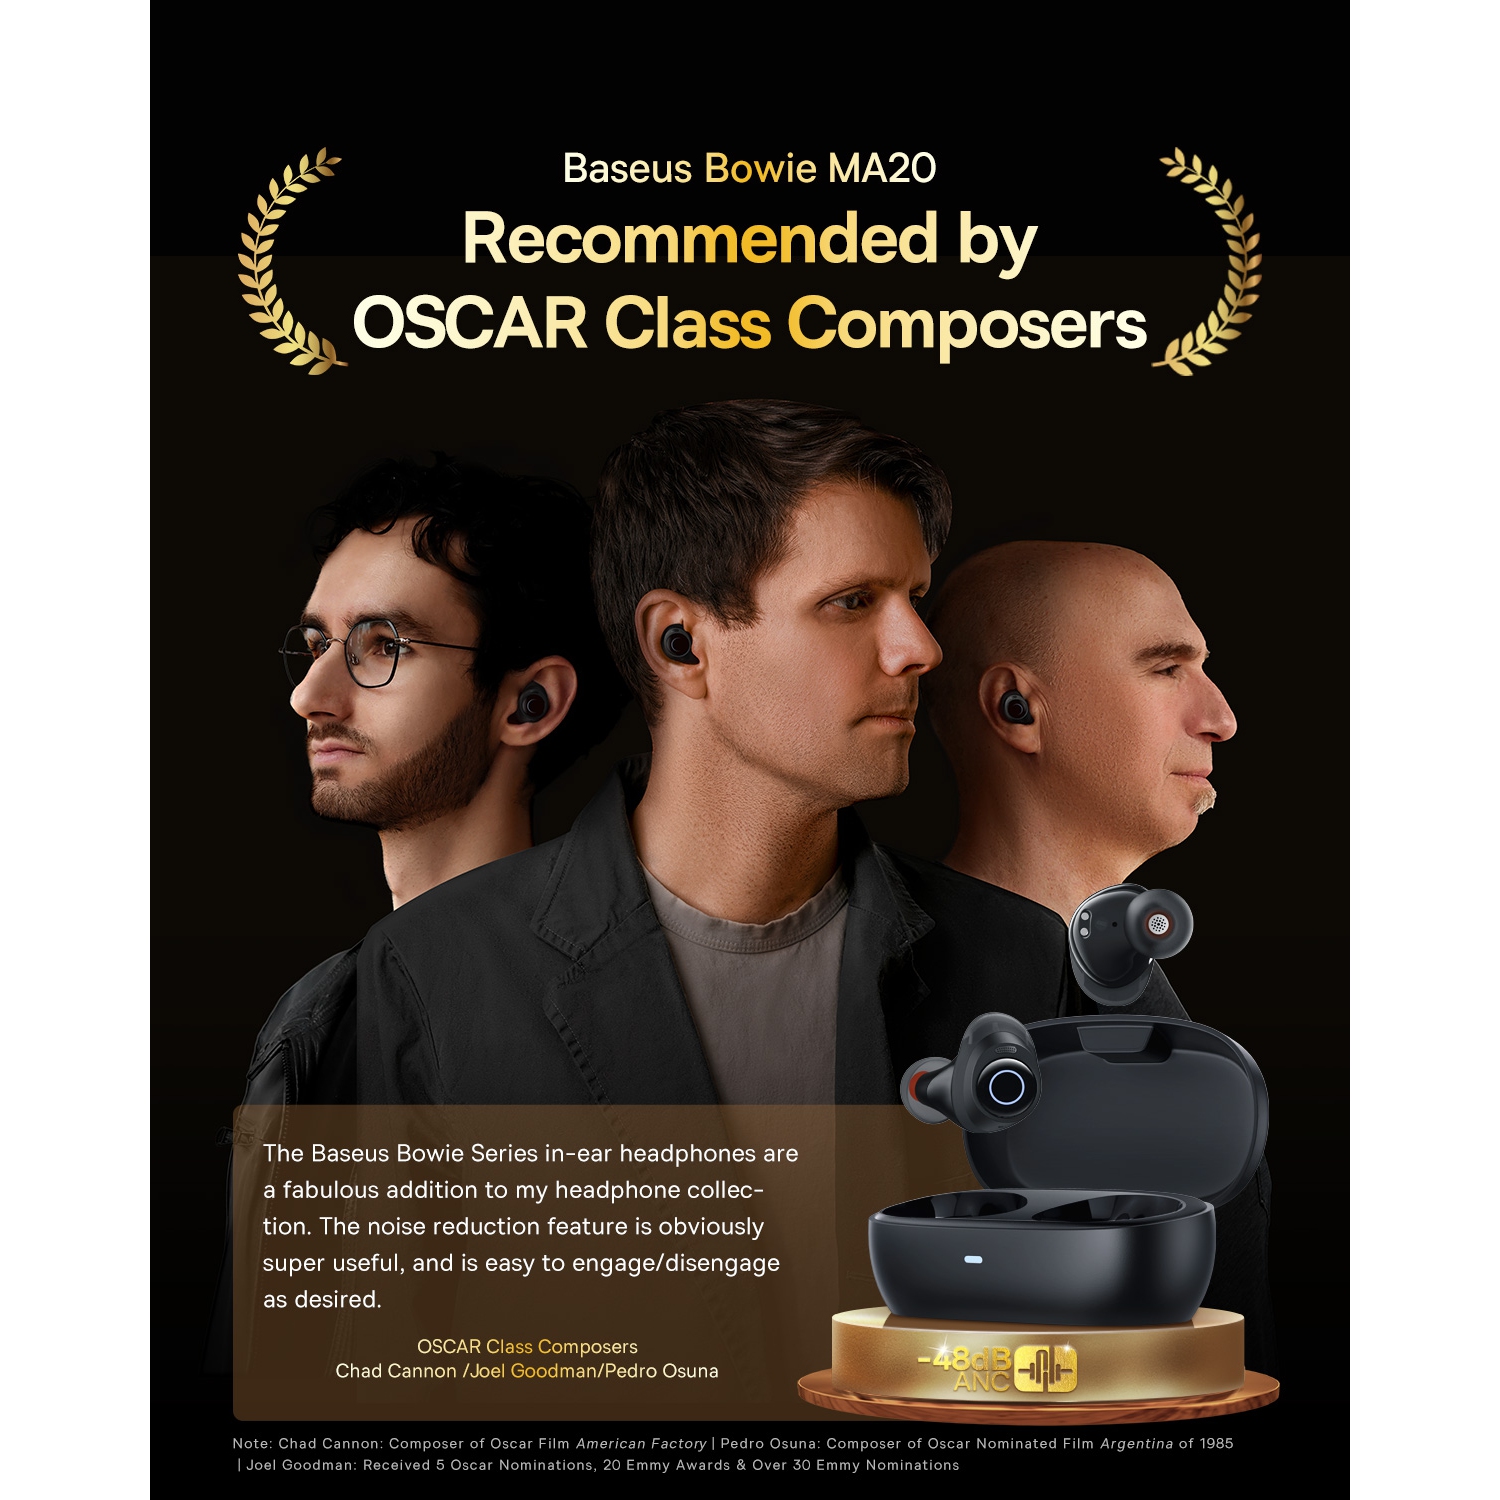 Baseus launched Bowie MA10 -- OSCAR Films Composers' Favorite Earbuds